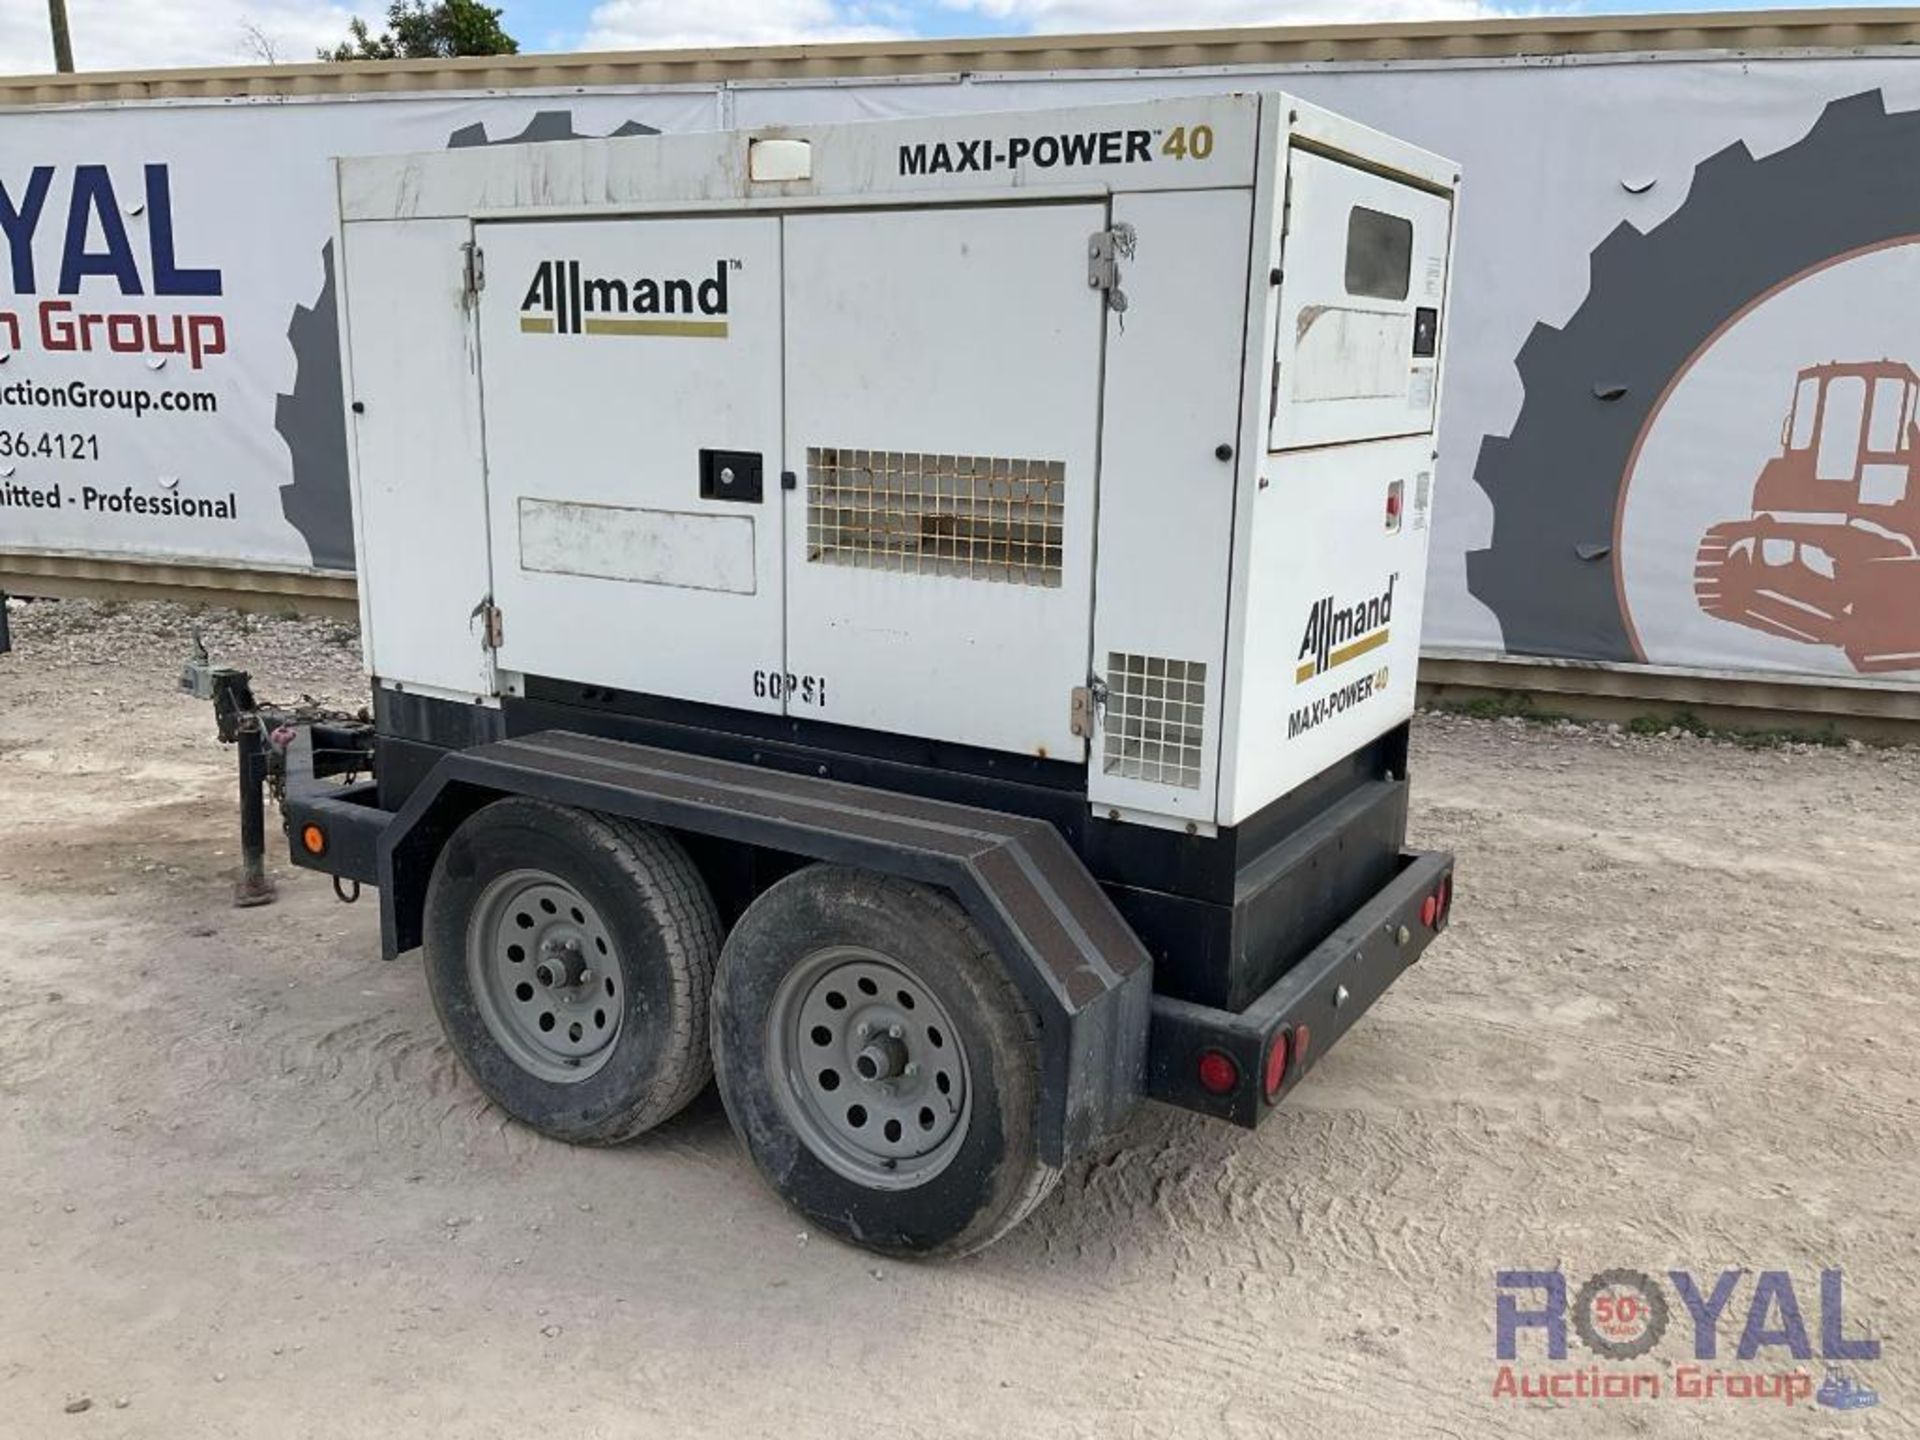 Allmand Maxi Power MP40-8B1 T/A Towable Generator - Image 4 of 13